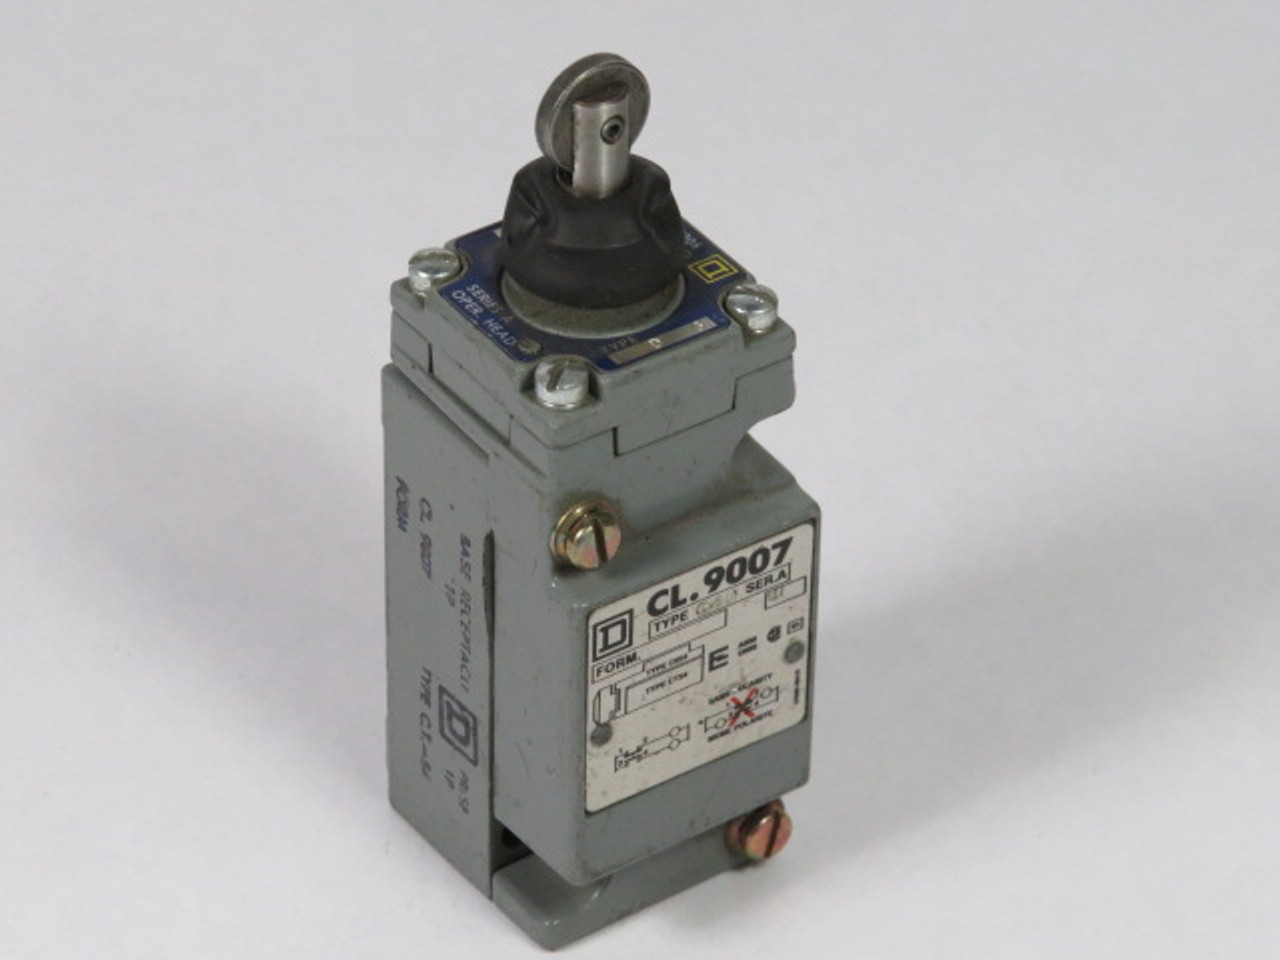 Square D 9007-C54D Limit Switch 10 Amp 600V USED